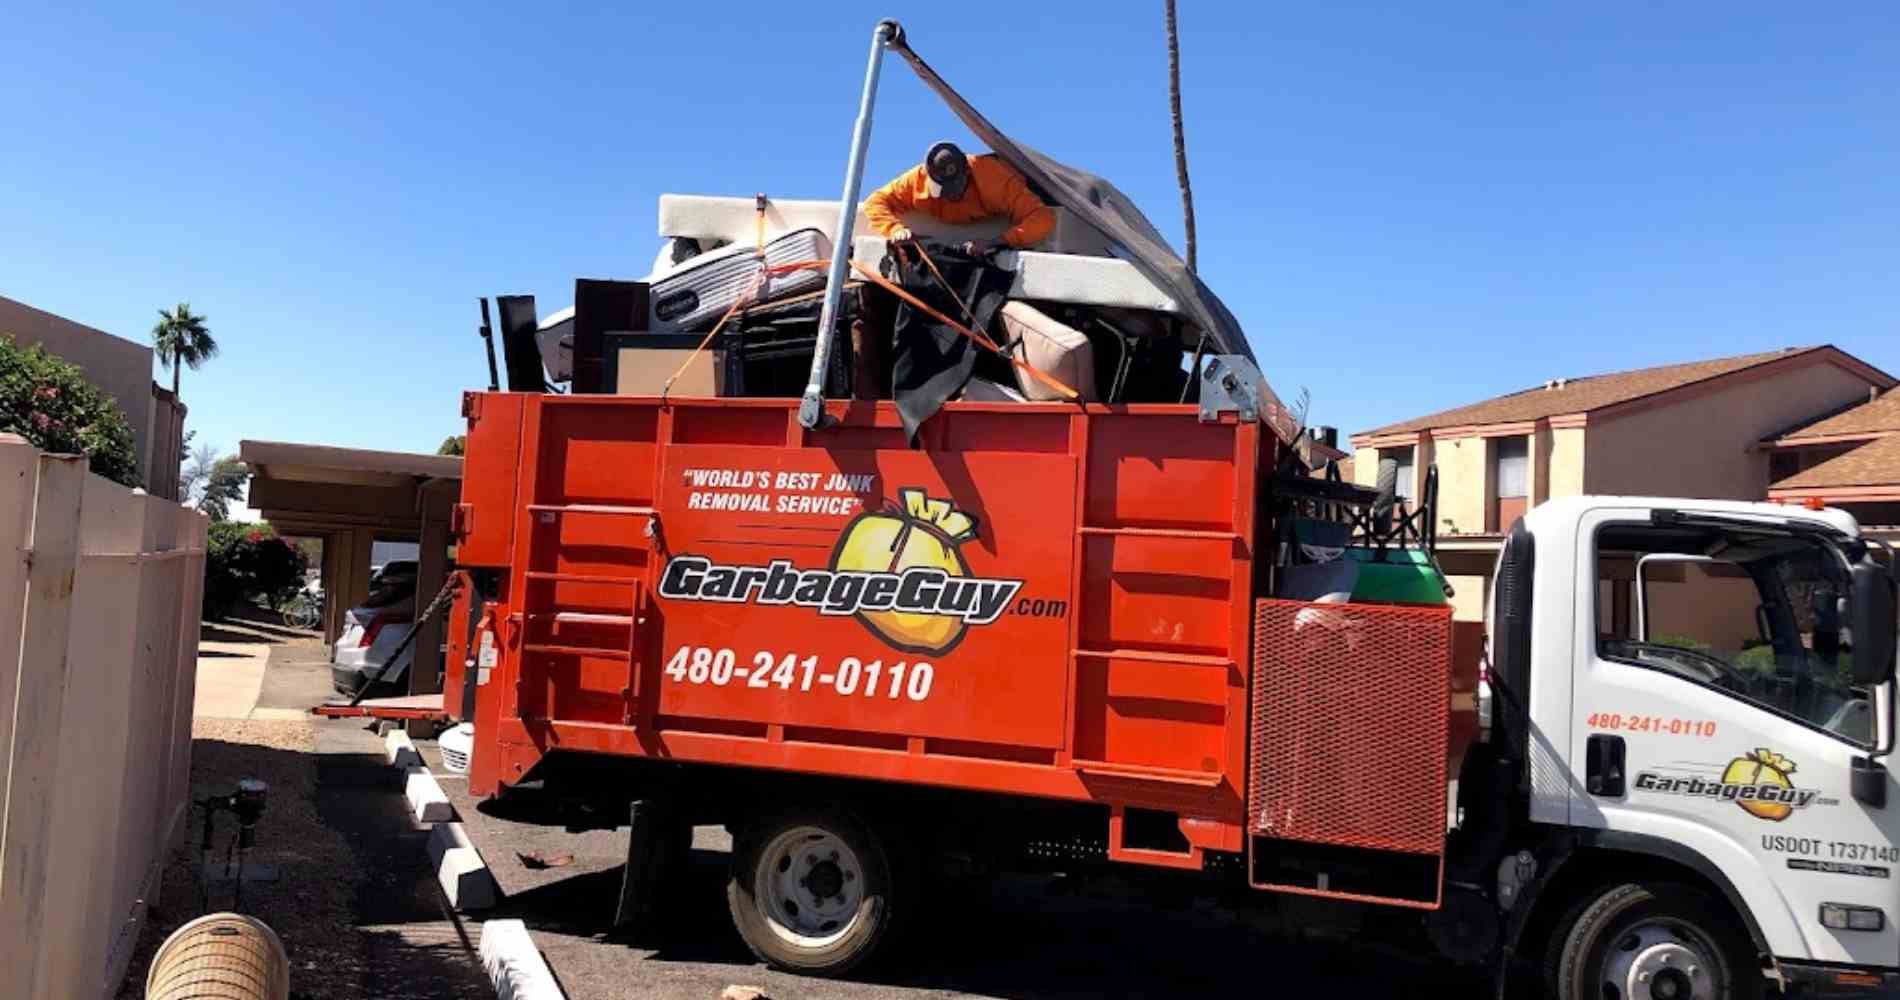 #1 for Furniture Removal in Litchfield Park, AZ With Over 1200 5-Star Reviews!